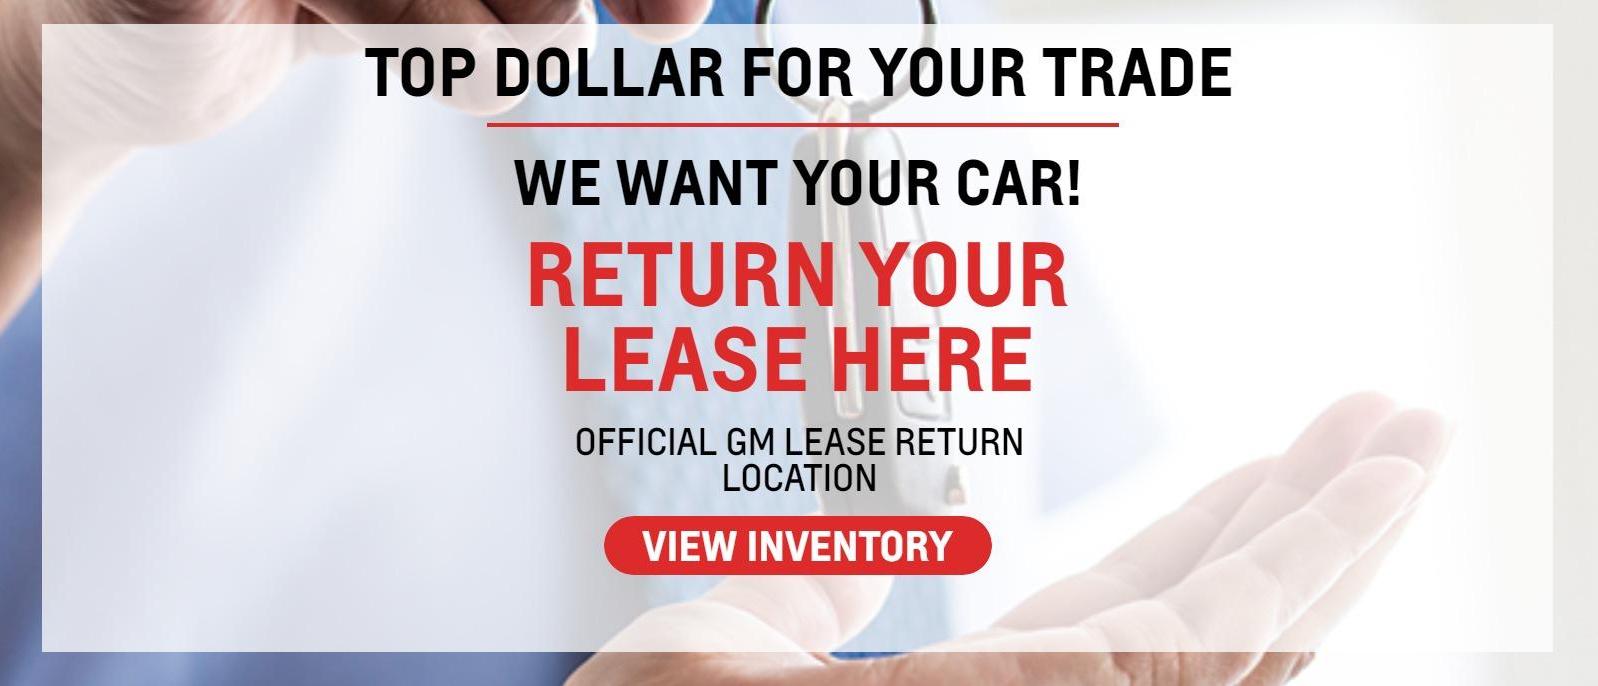 Top dollar for your trade - We want your car!  Official GM lease return location